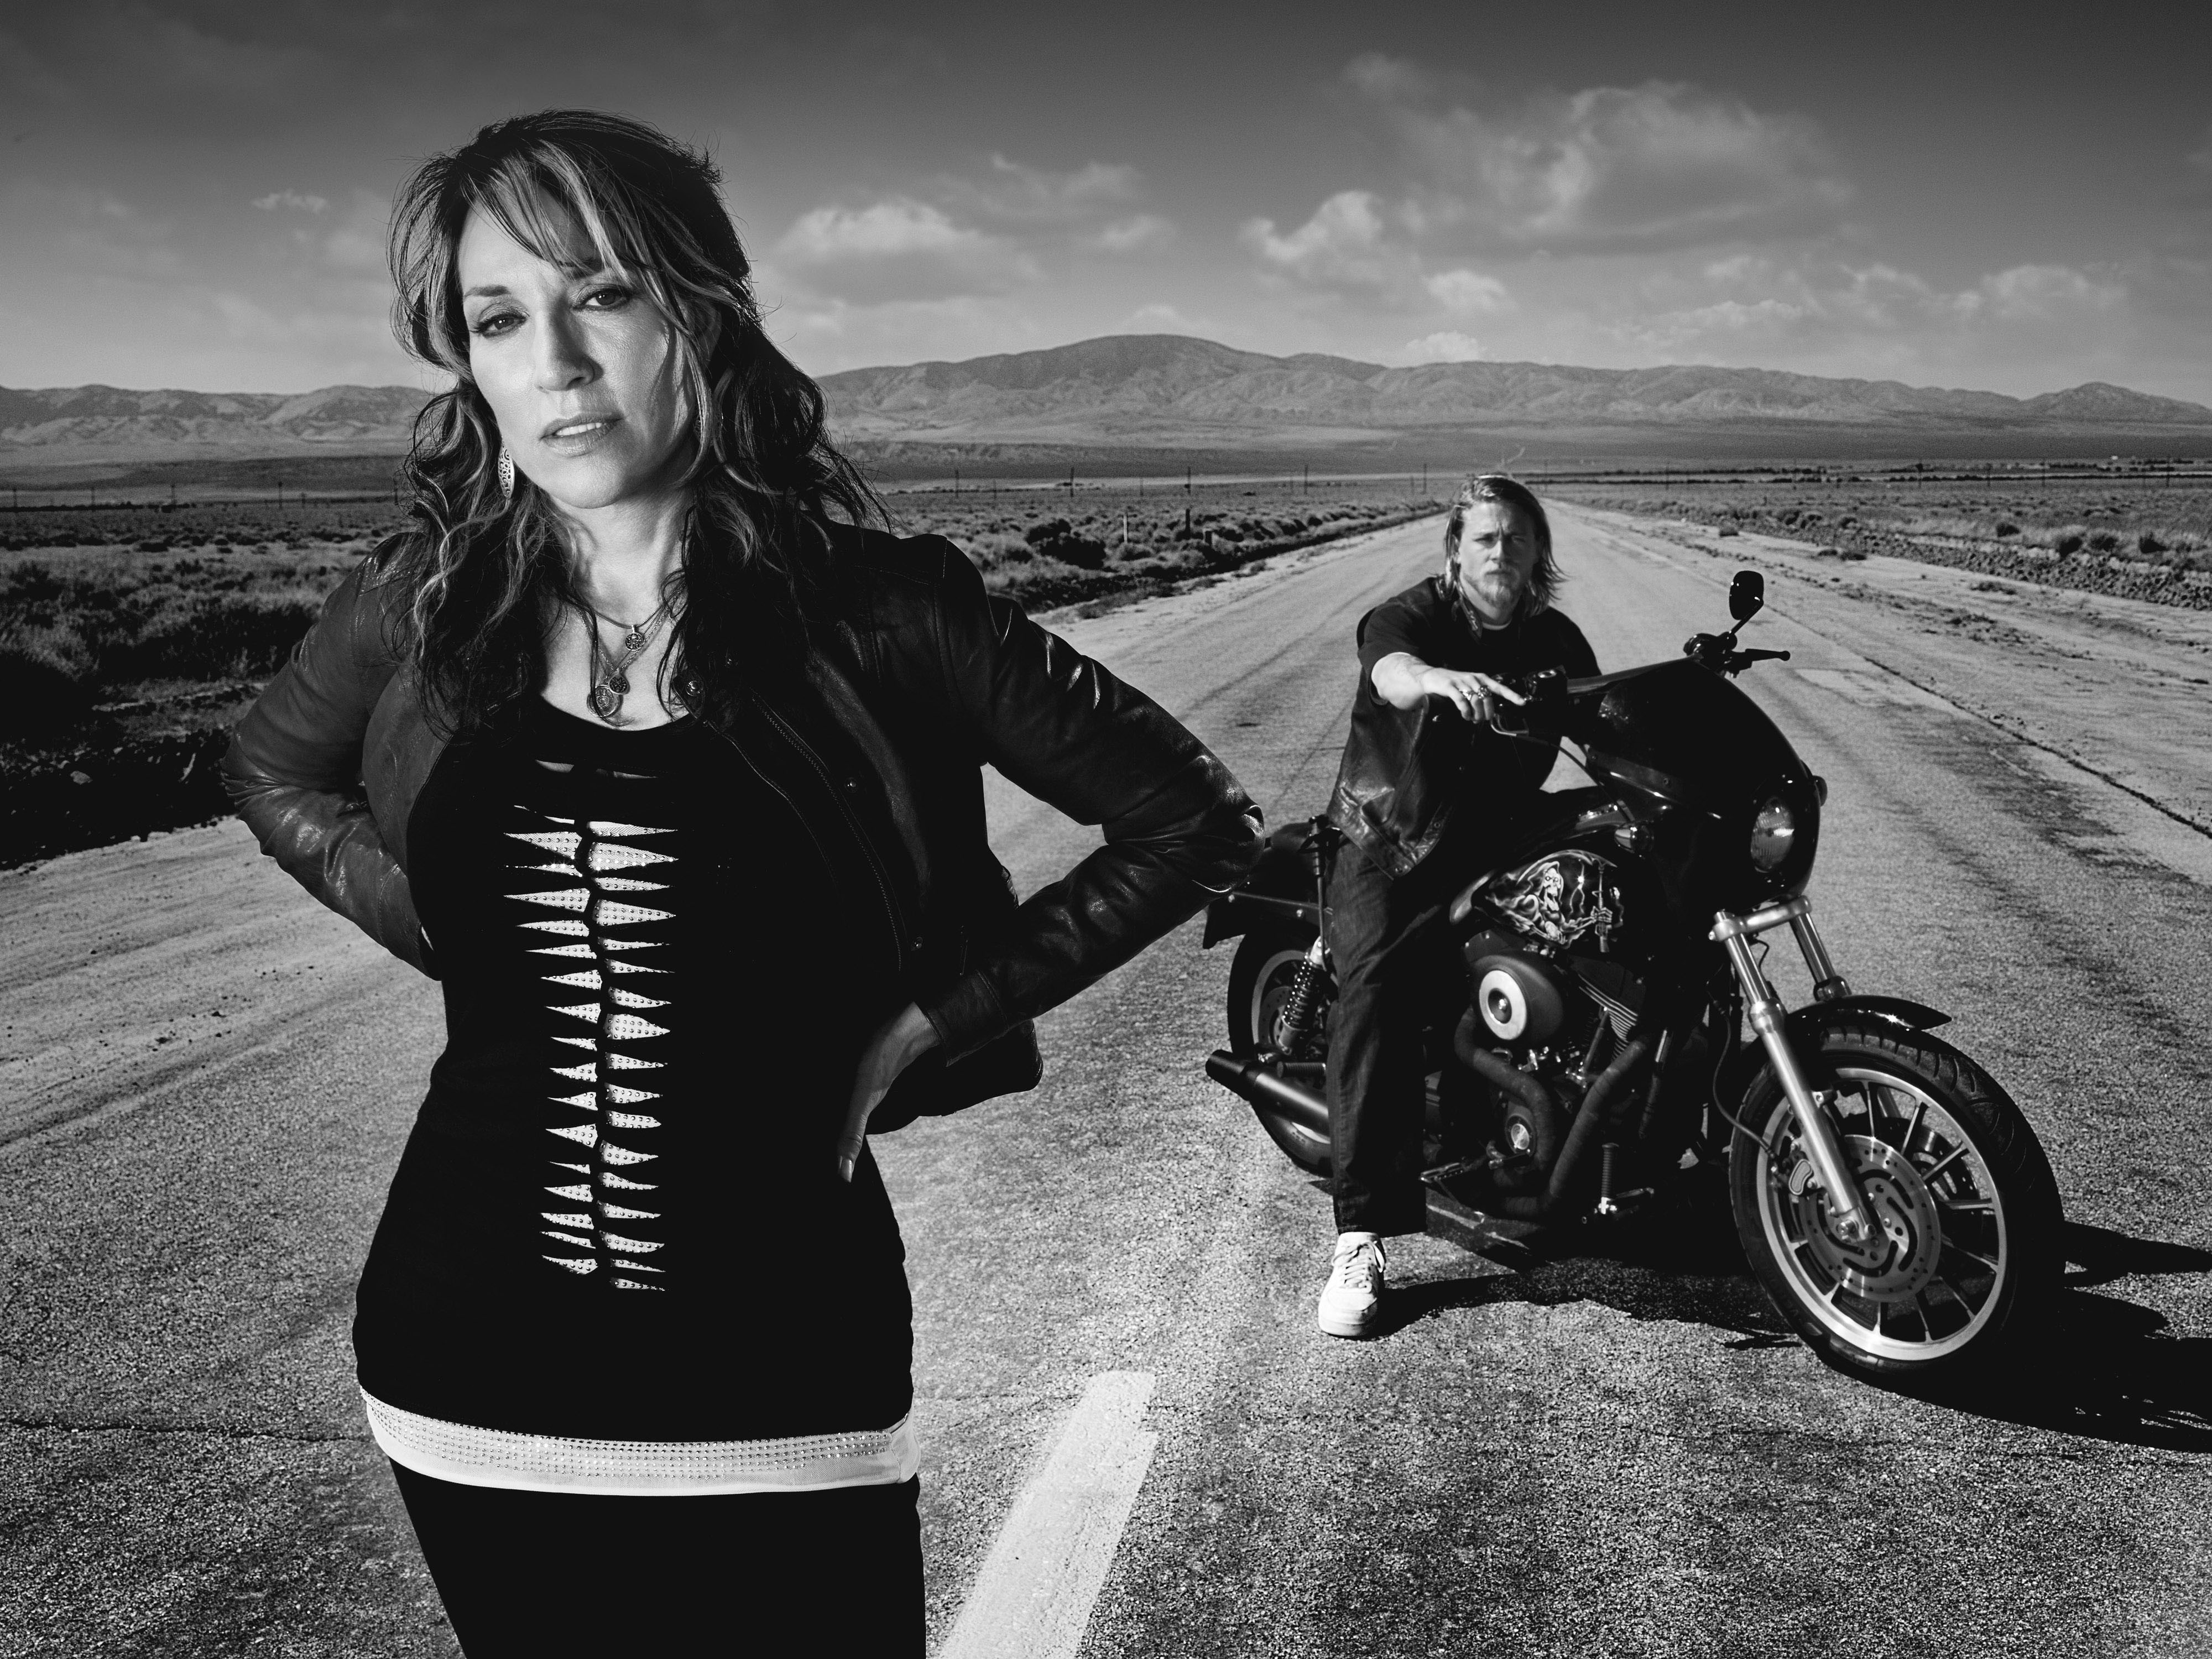 tv show, sons of anarchy